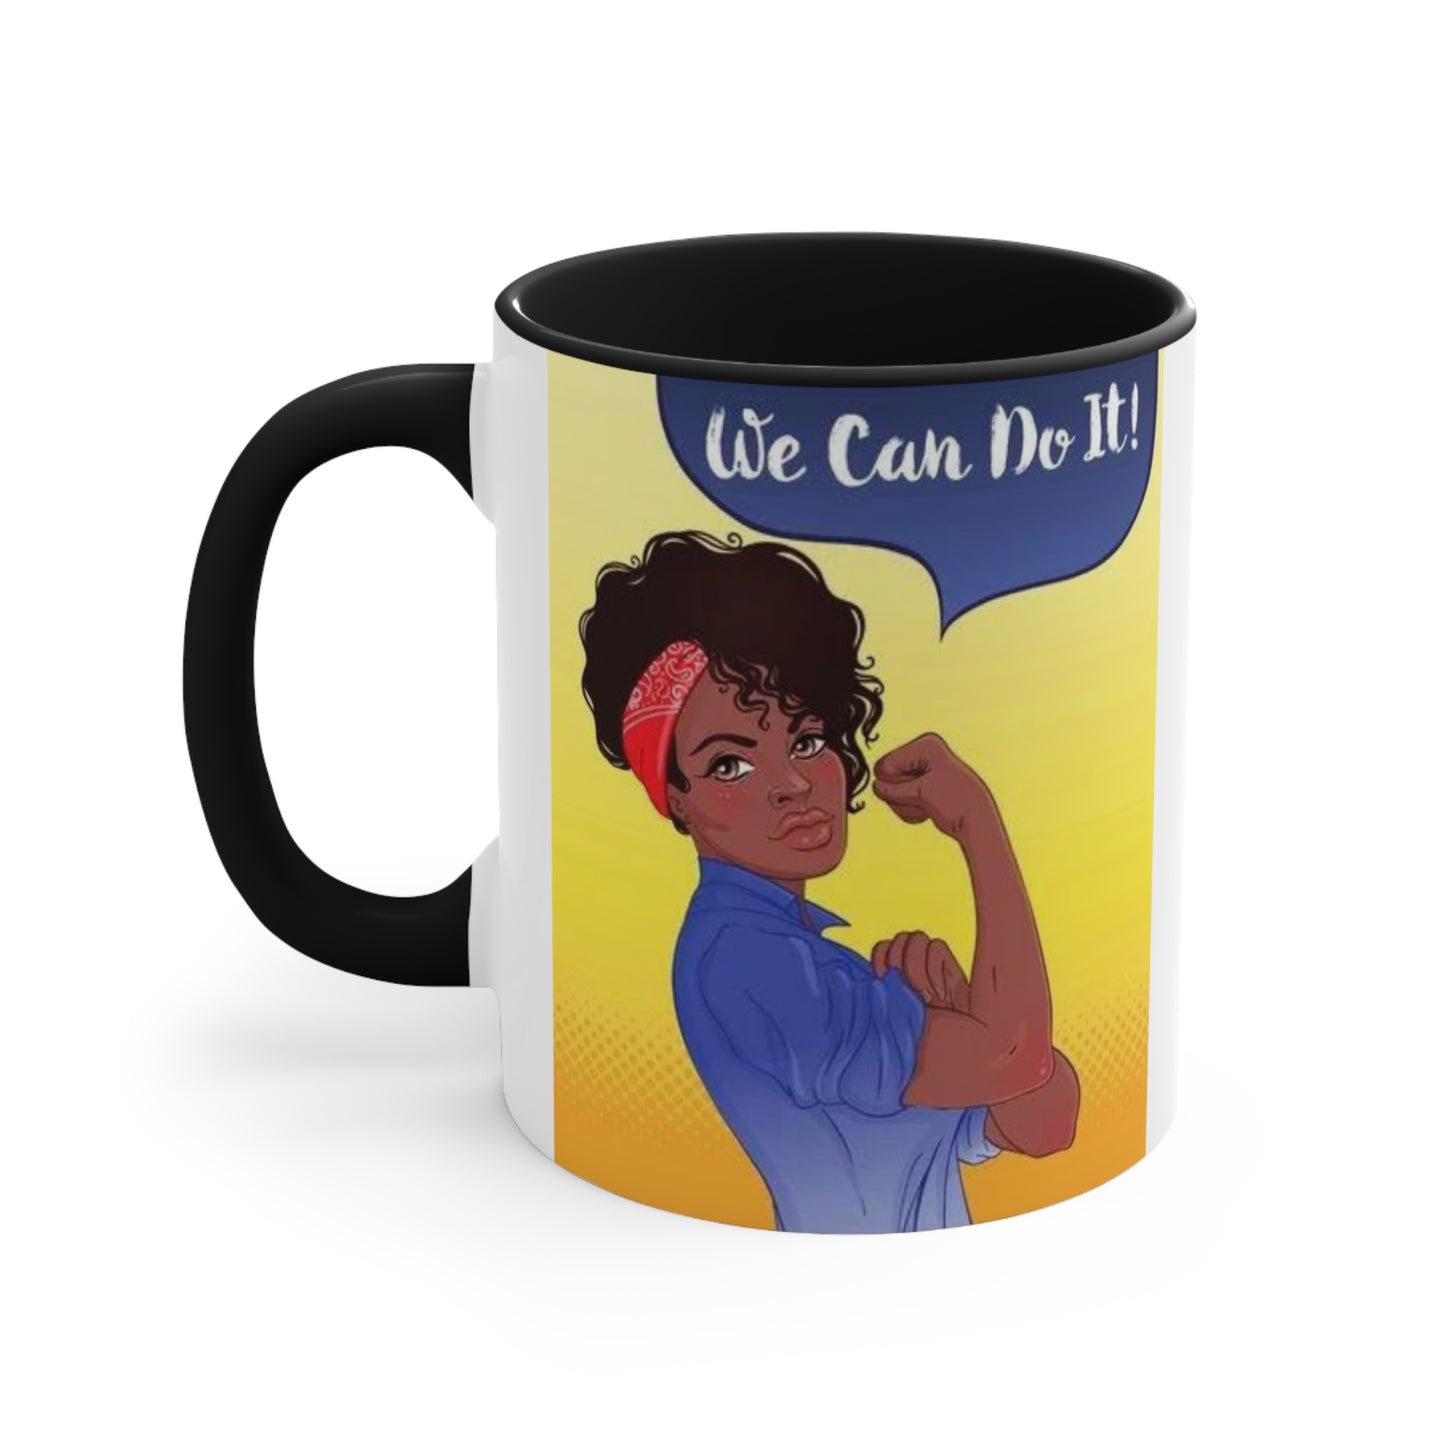 We Can Do It Ceramic Coffee Mug, teacher gift, coworker gift, unique gift, gift for mom, gift for dad, funny mug, Motivation gift